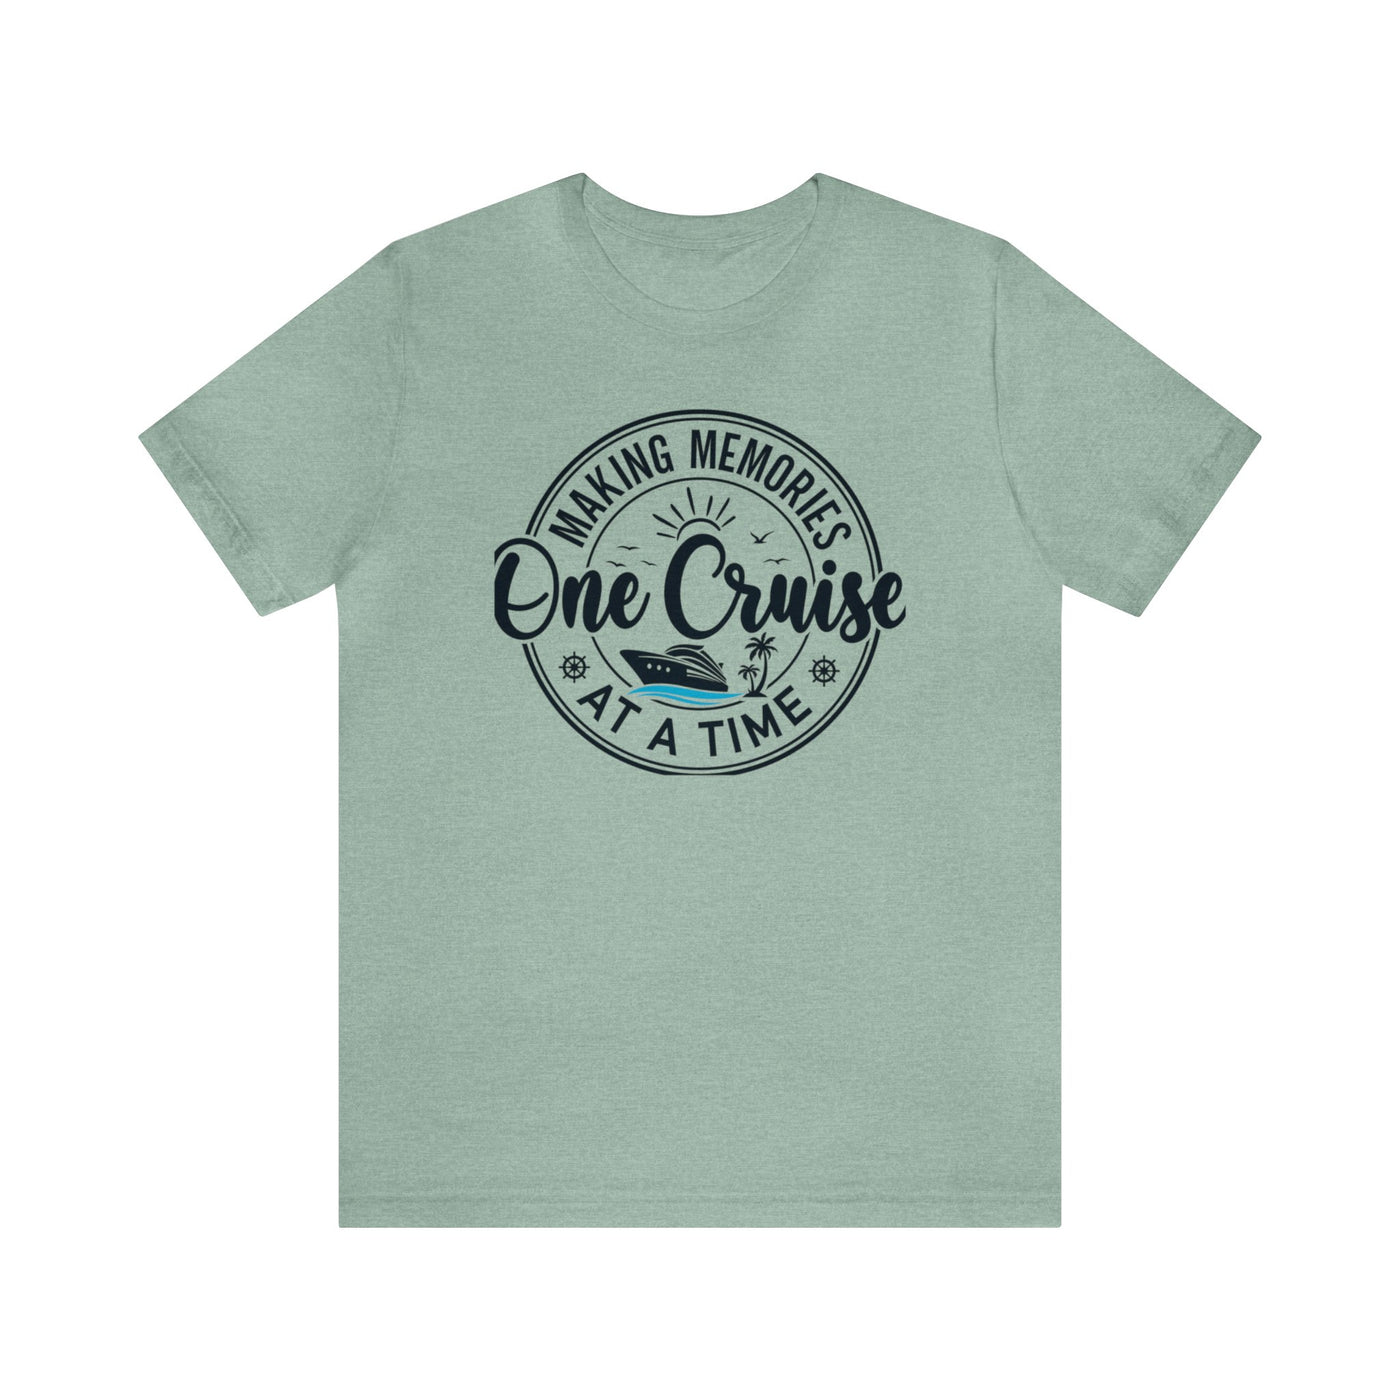 Making memories one cruise at a time Short Sleeve Tee